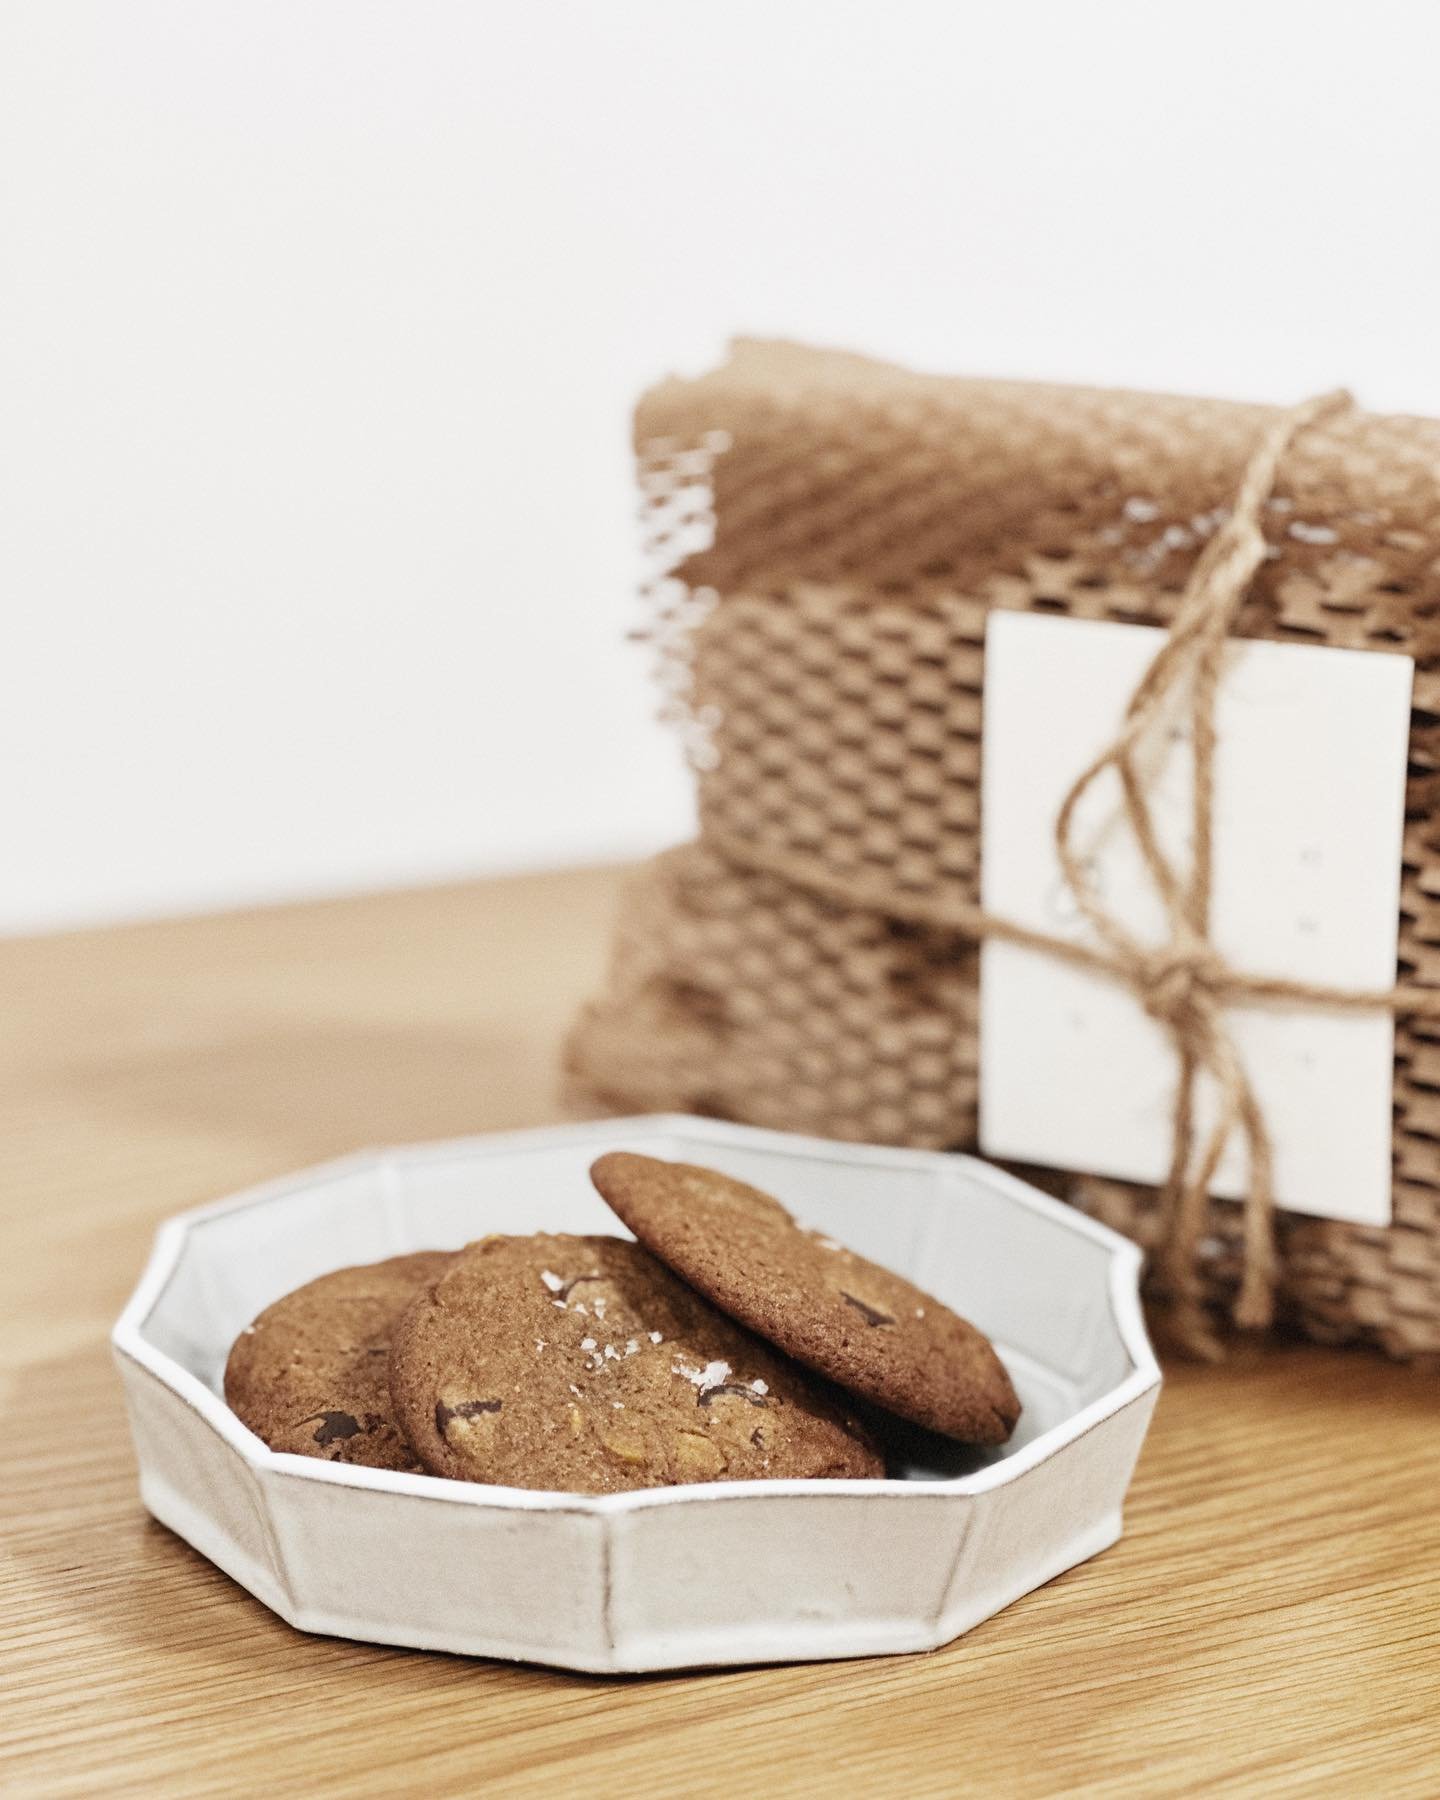 From time to time I&rsquo;d crave a very simple and basic cookie. Toasty, creamy, sometimes with a sudden bite of chocolate surprise. One with the lovely notes of sweet vanilla, browned butter, and depth of flavour, without having to feel the cloying